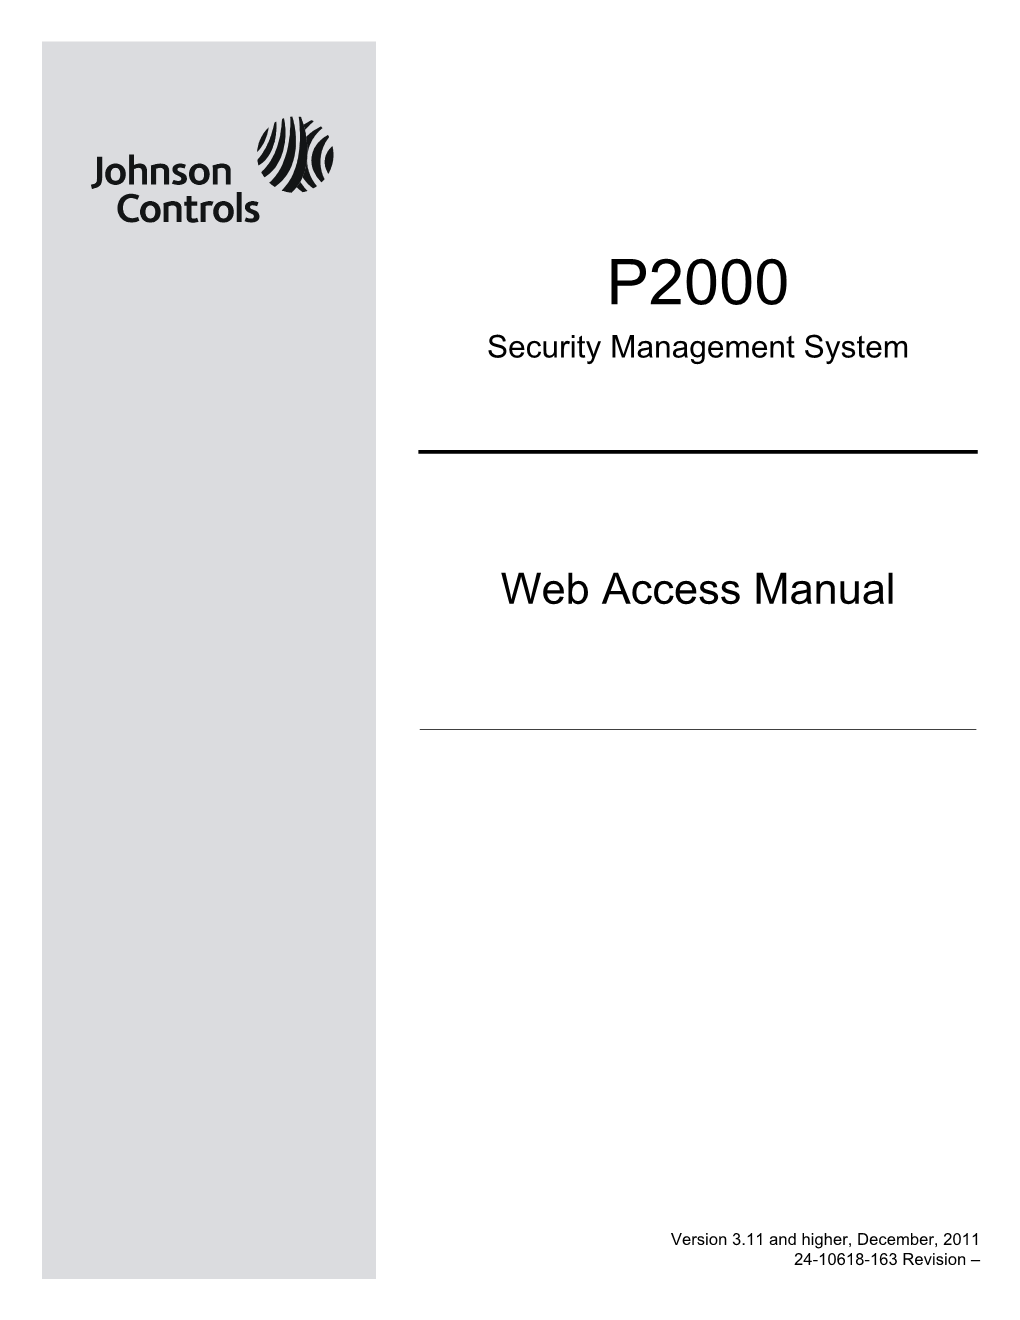 P2000 Security Management System Web Access Manual